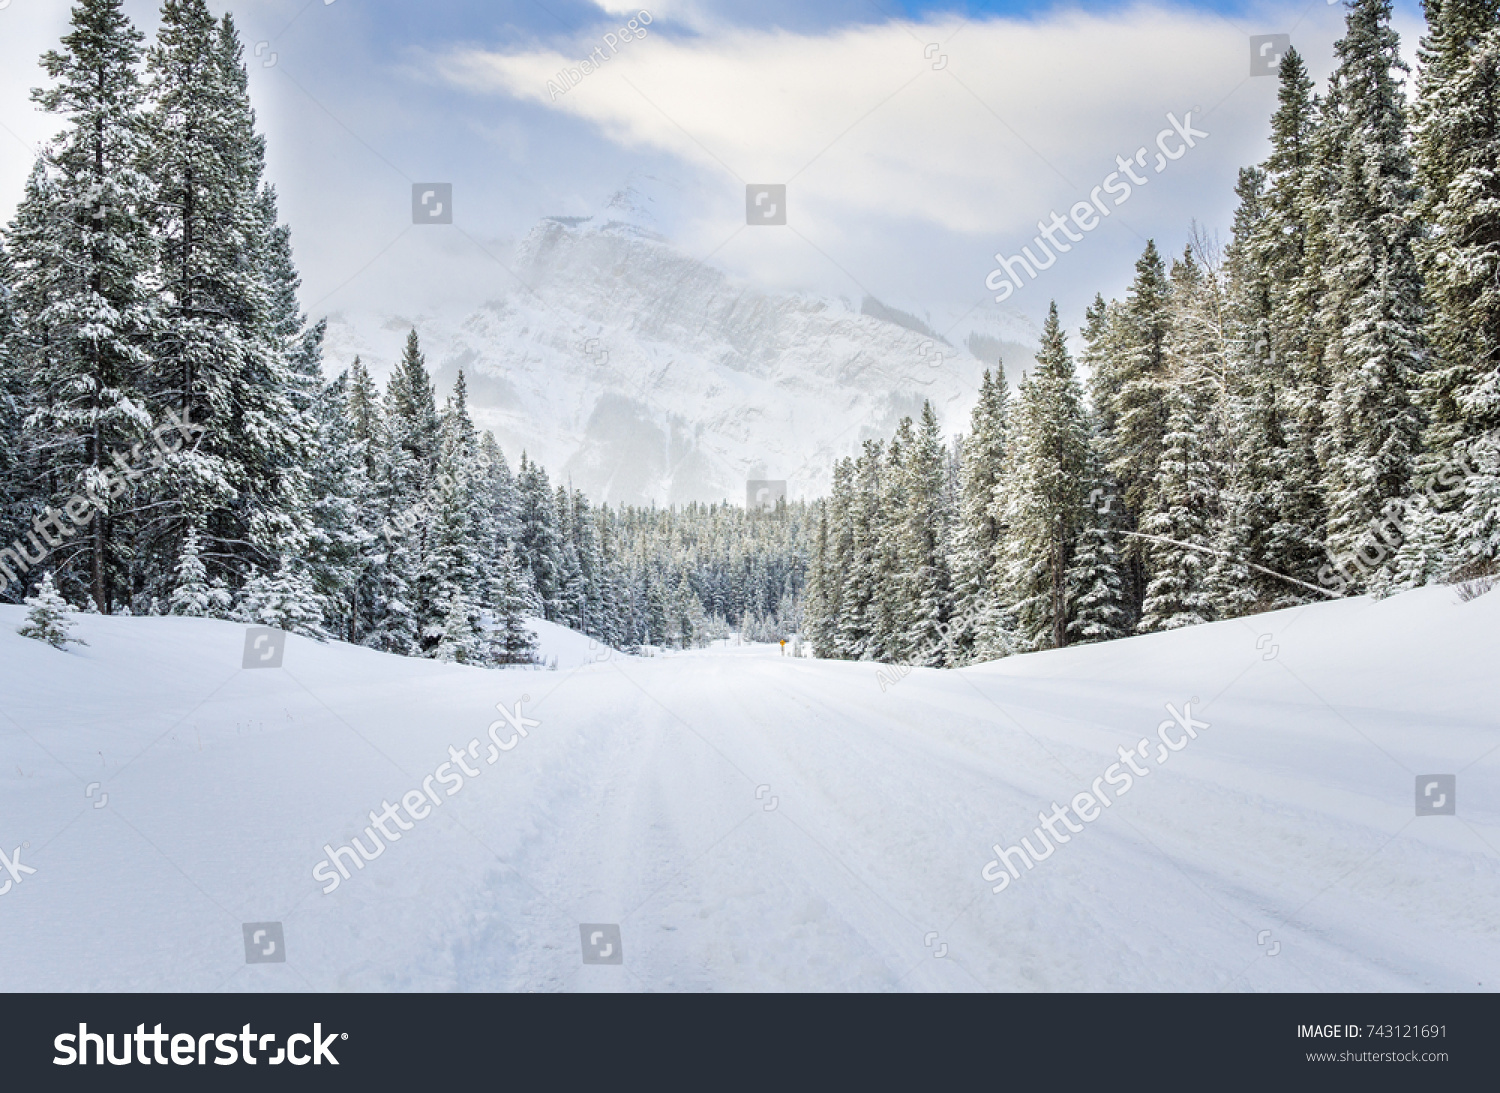 Snowy Road through a Forested Mountain Landscape in Winter #743121691